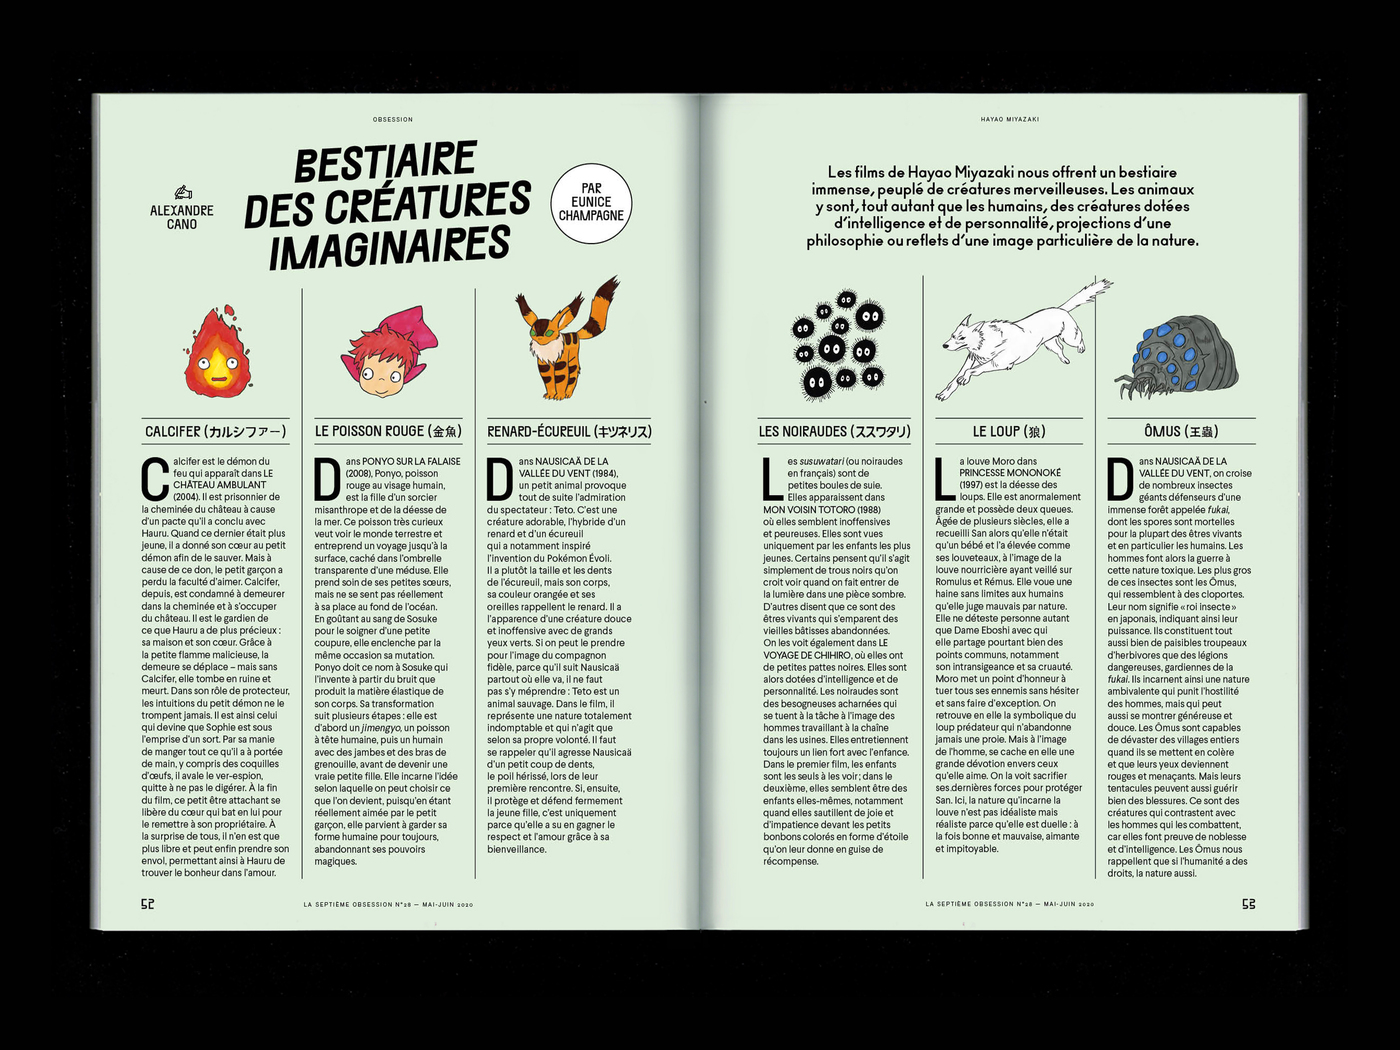 La Septième Obsession, issue 28, “Hayao Miyazaki” - Fonts In Use